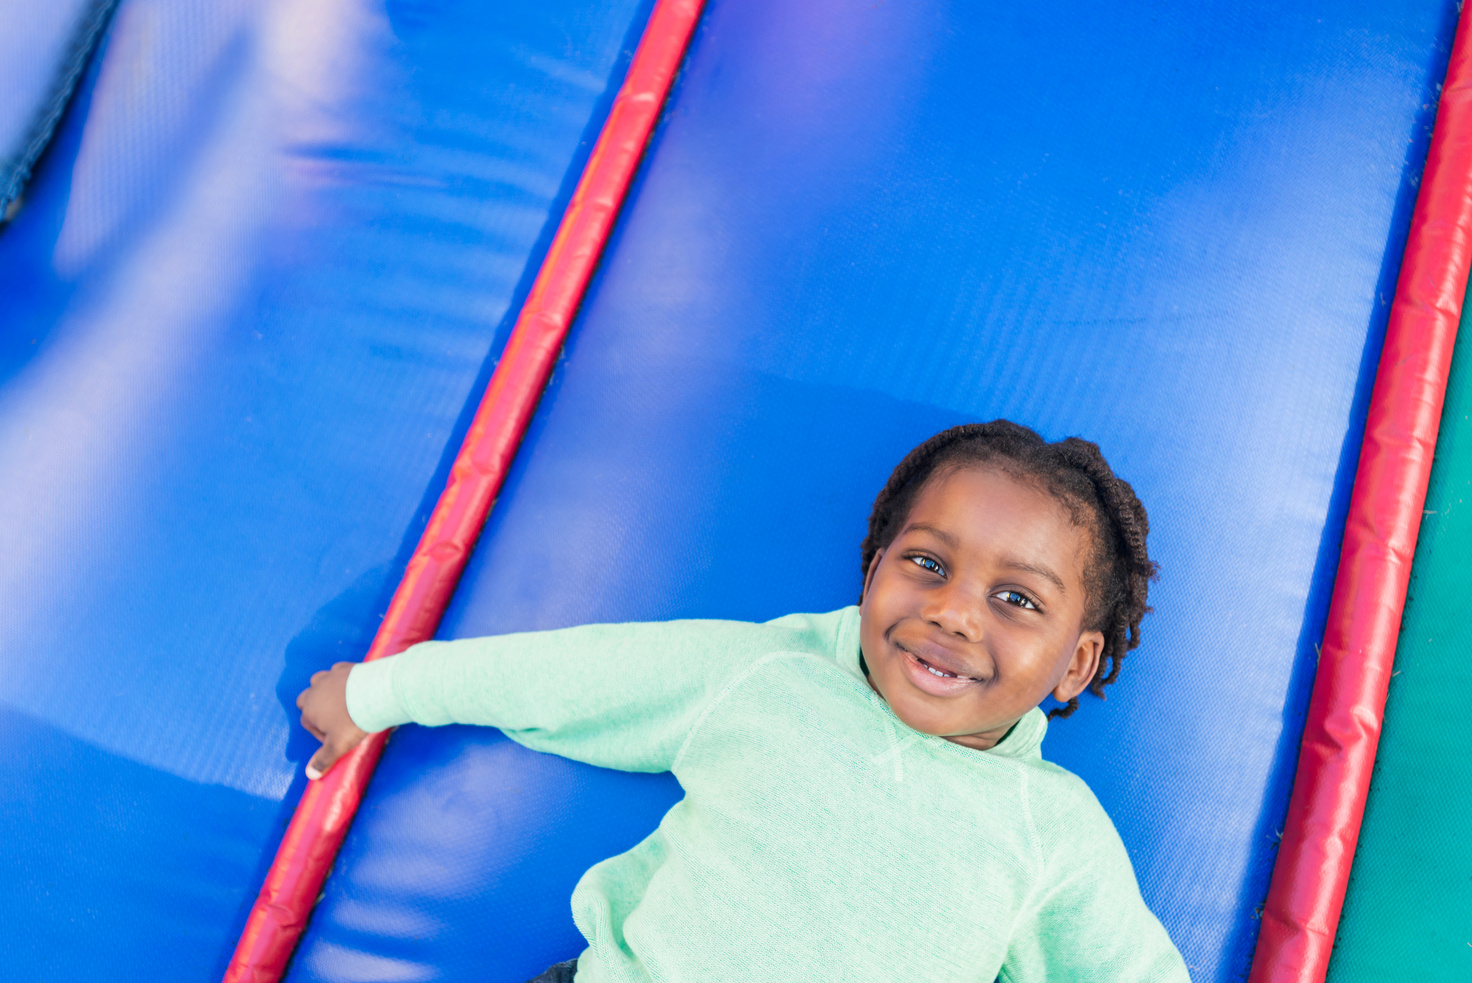 Black boy playing in bounce house